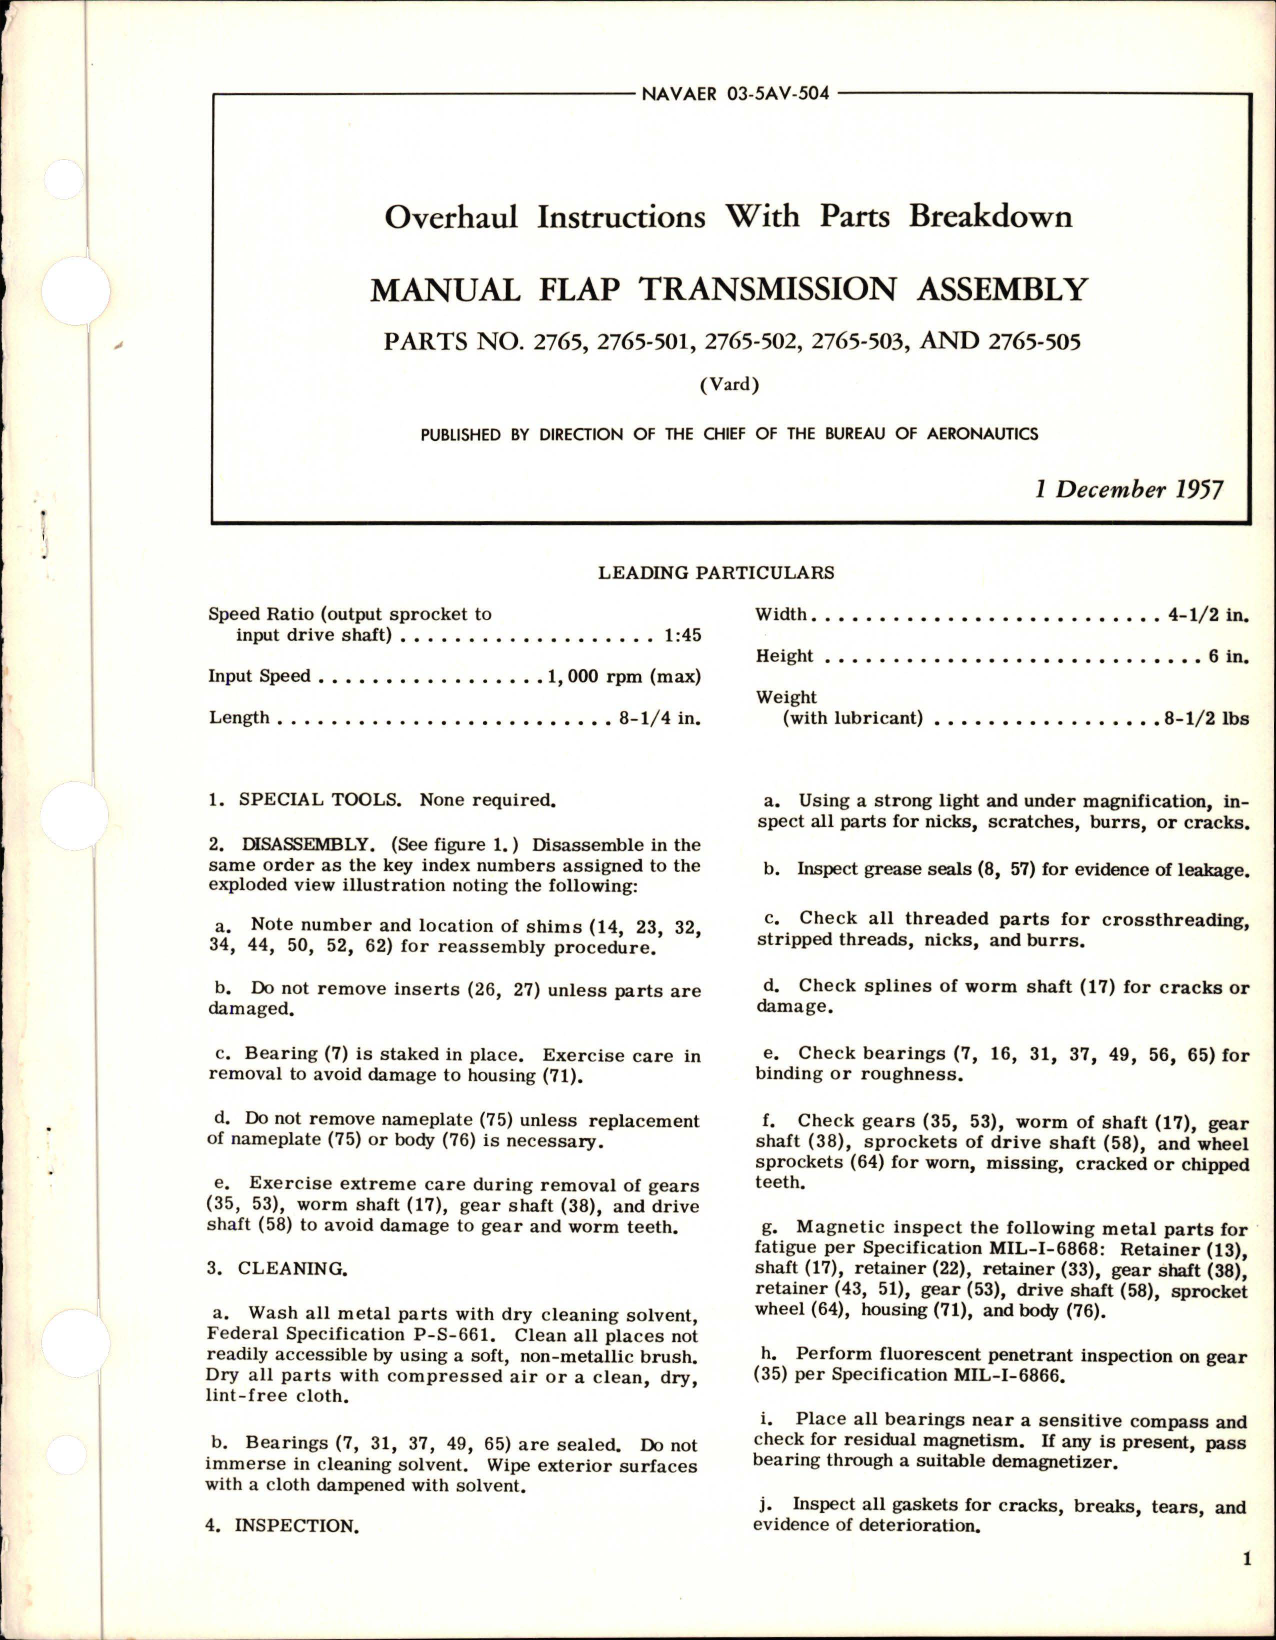 Sample page 1 from AirCorps Library document: Overhaul Instructions with Parts Breakdown for Manual Flap Transmission Assembly 